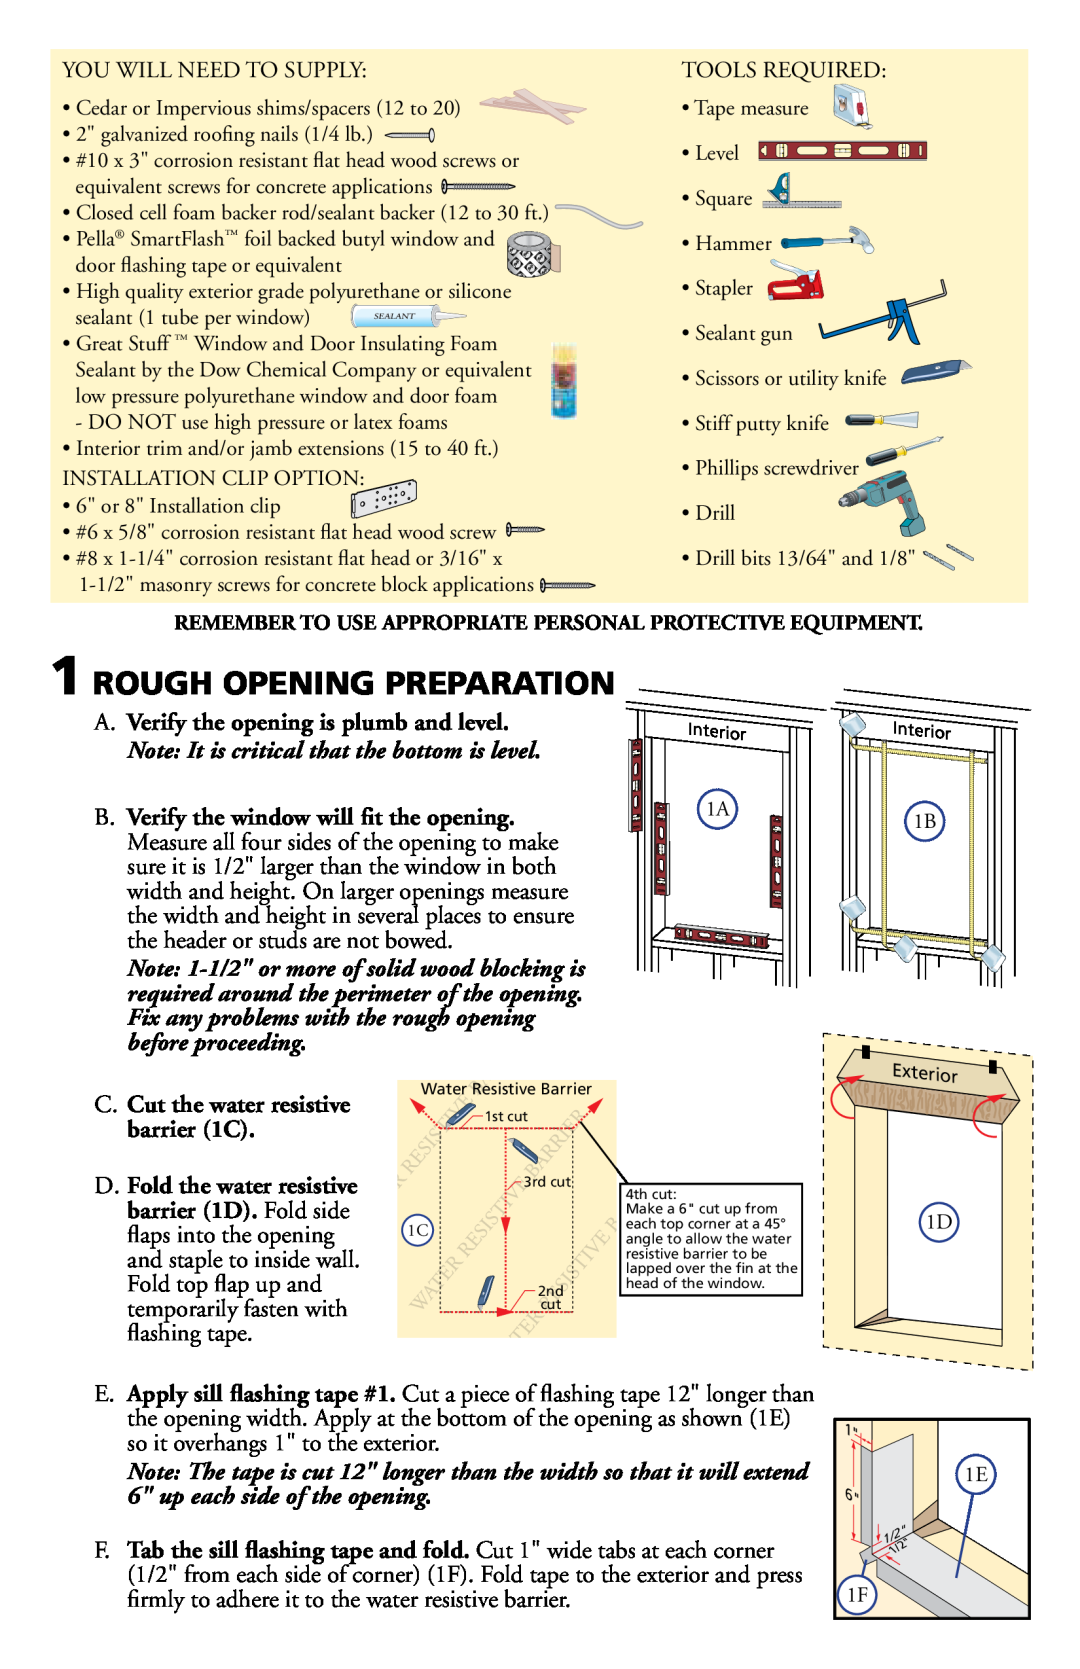 Pella 80ED0101 installation instructions Rough Opening Preparation, A. Verify the opening is plumb and level 